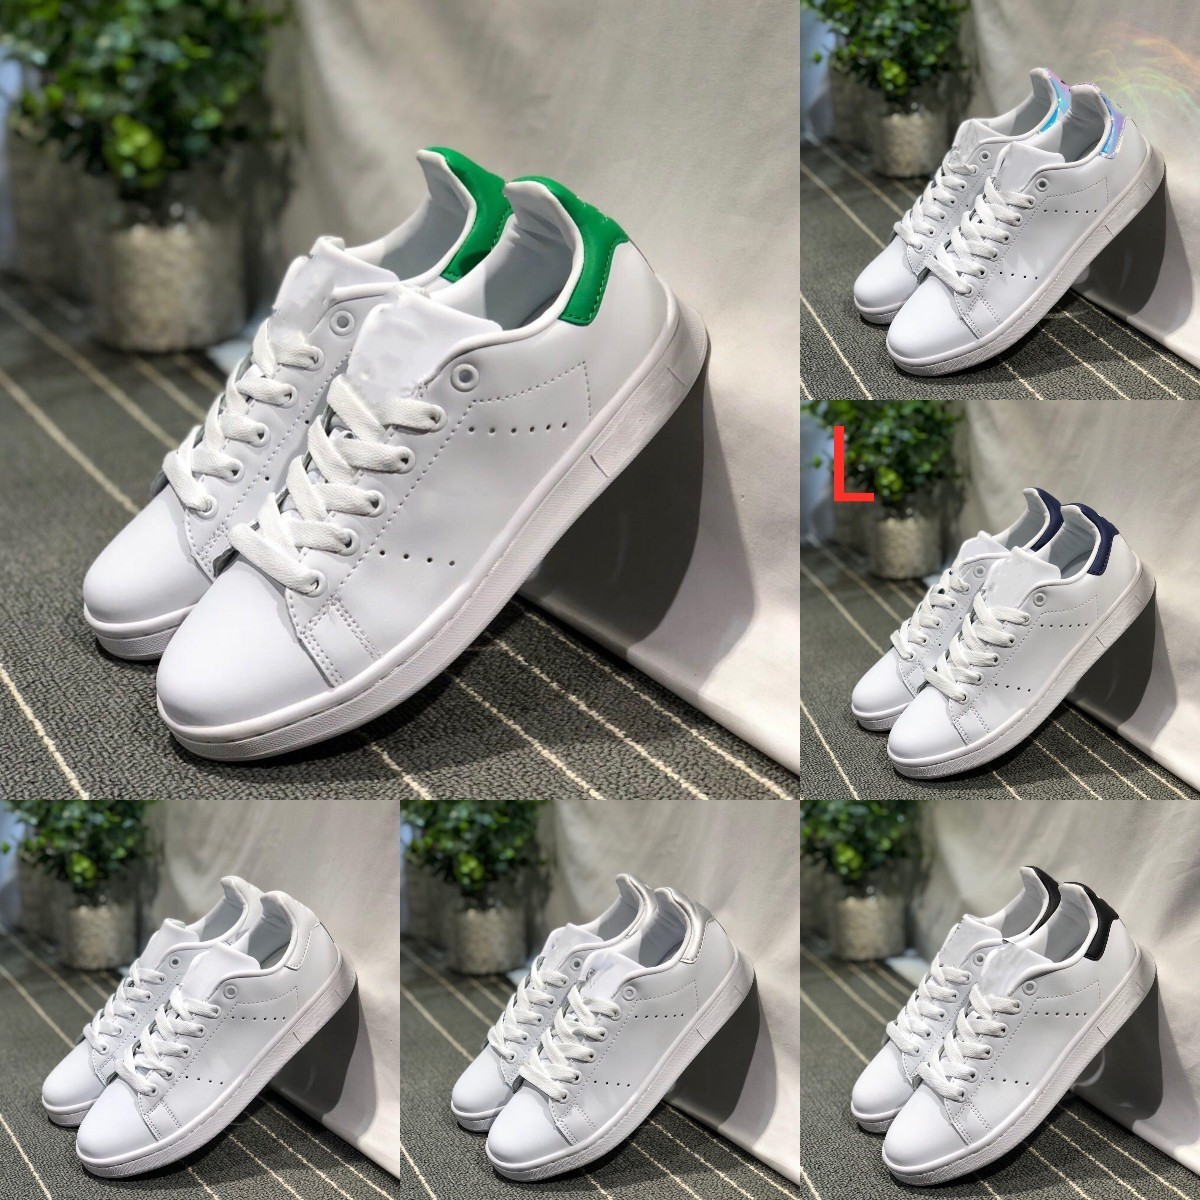 

2022 Mens Womens Free Superstar Casual Shoes Designer White Black Pink Blue Gold Superstars 80s Pride Sneakers Super Star Designer Trainer Sport Sneakers, Please contact us